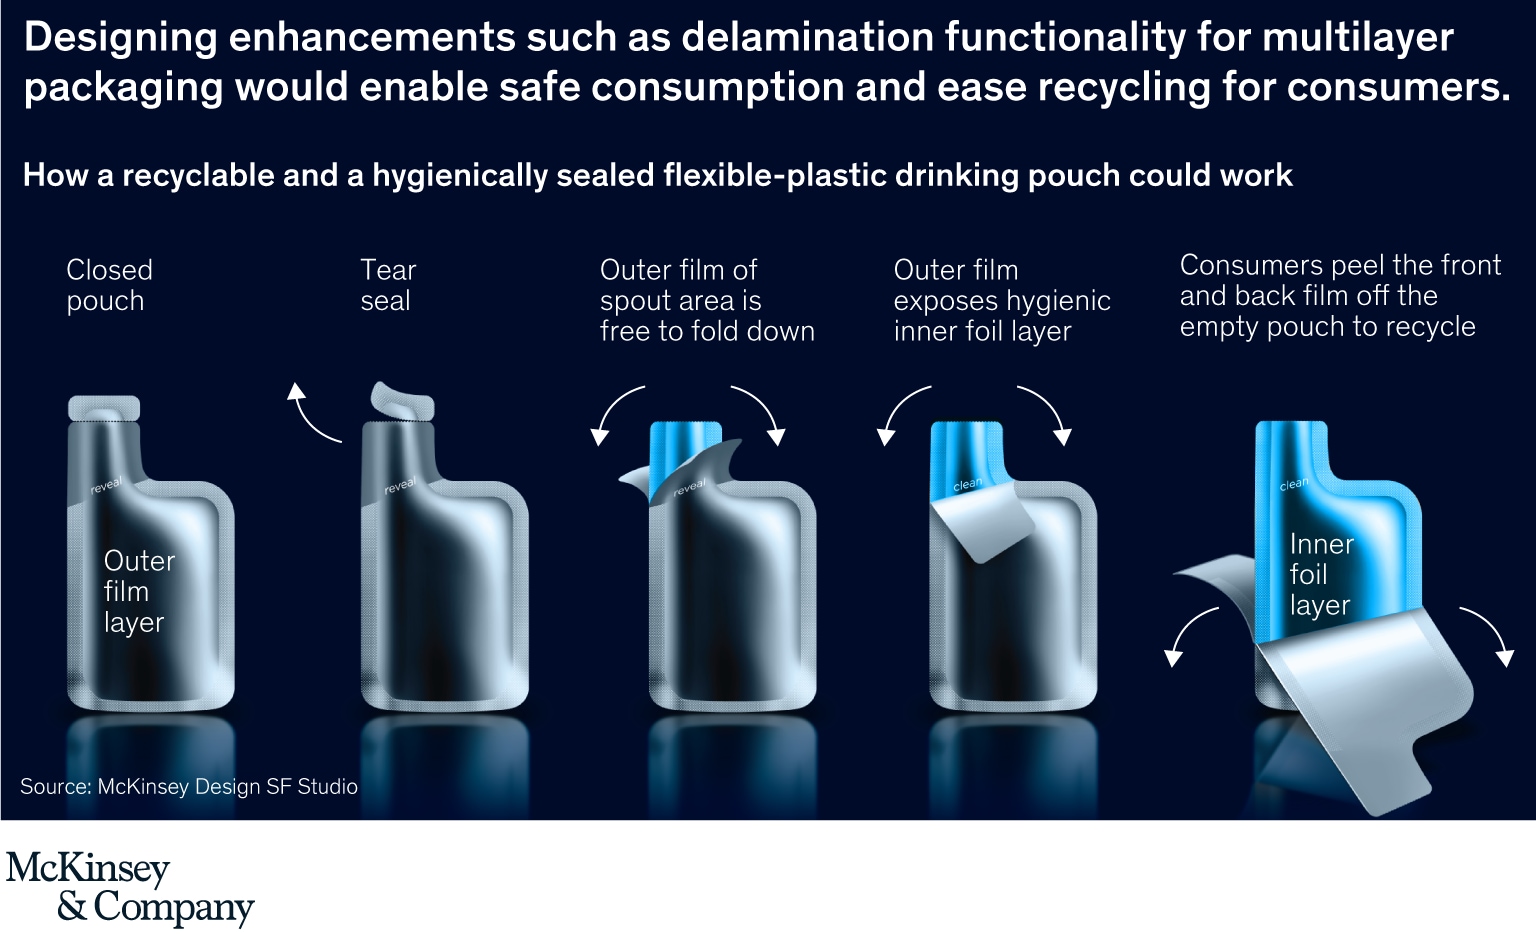 Designing enhancements such as delamination functionality for multilayer packaging would enable safe consumption and ease recycling for consumers.